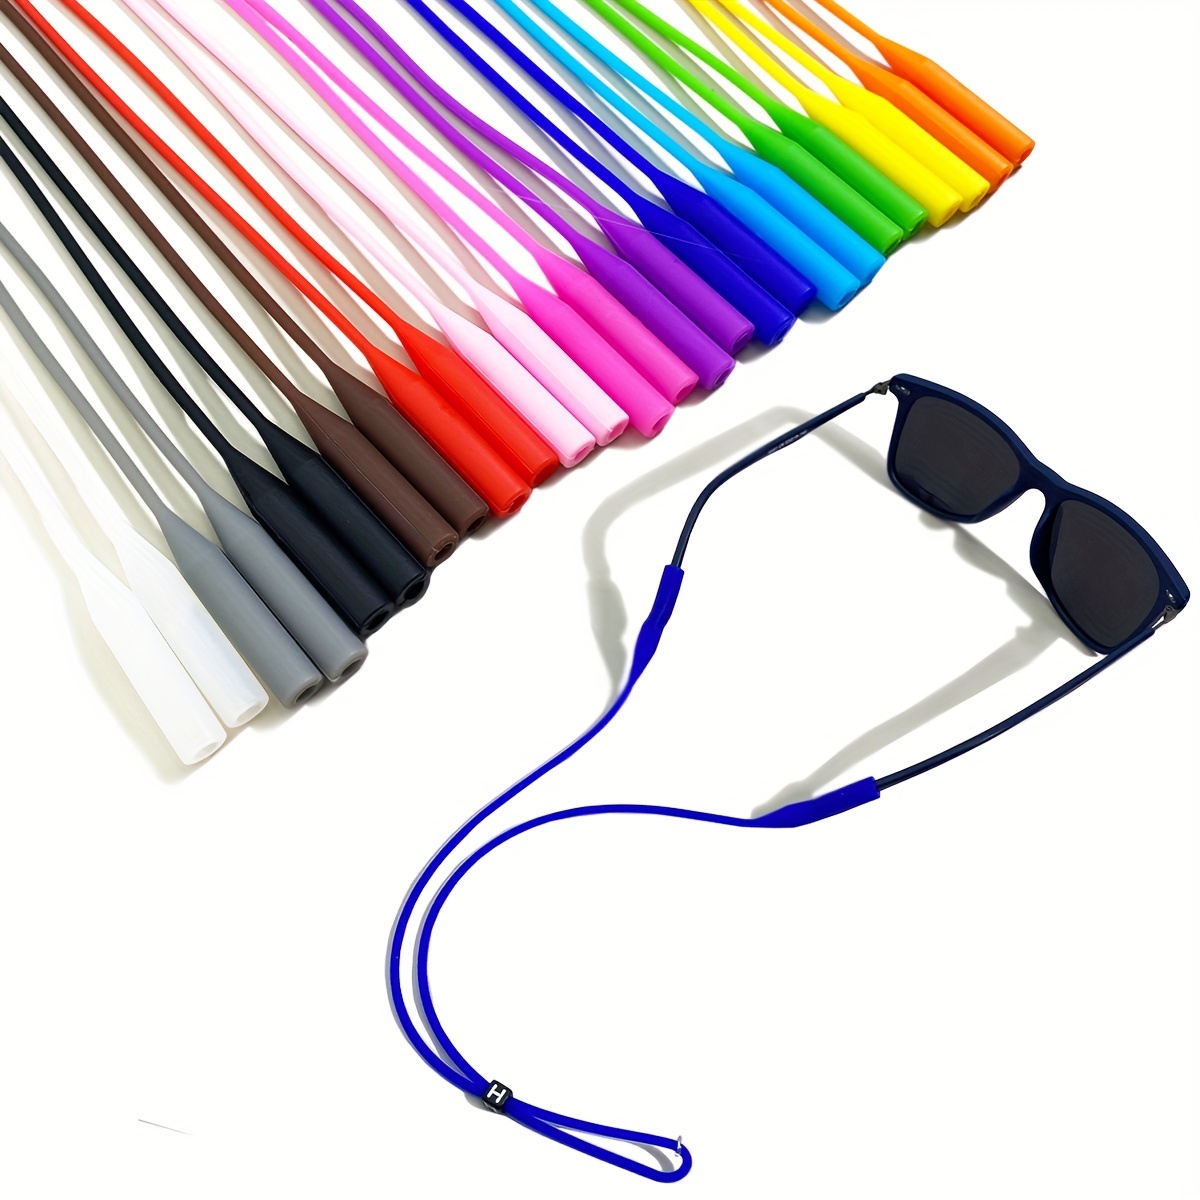 12 Pcs Eyeglasses Straps Holder,Cord Non-Slip Glasses Retainer for Adults/Kids,12Color, Size: Small, 12 Color